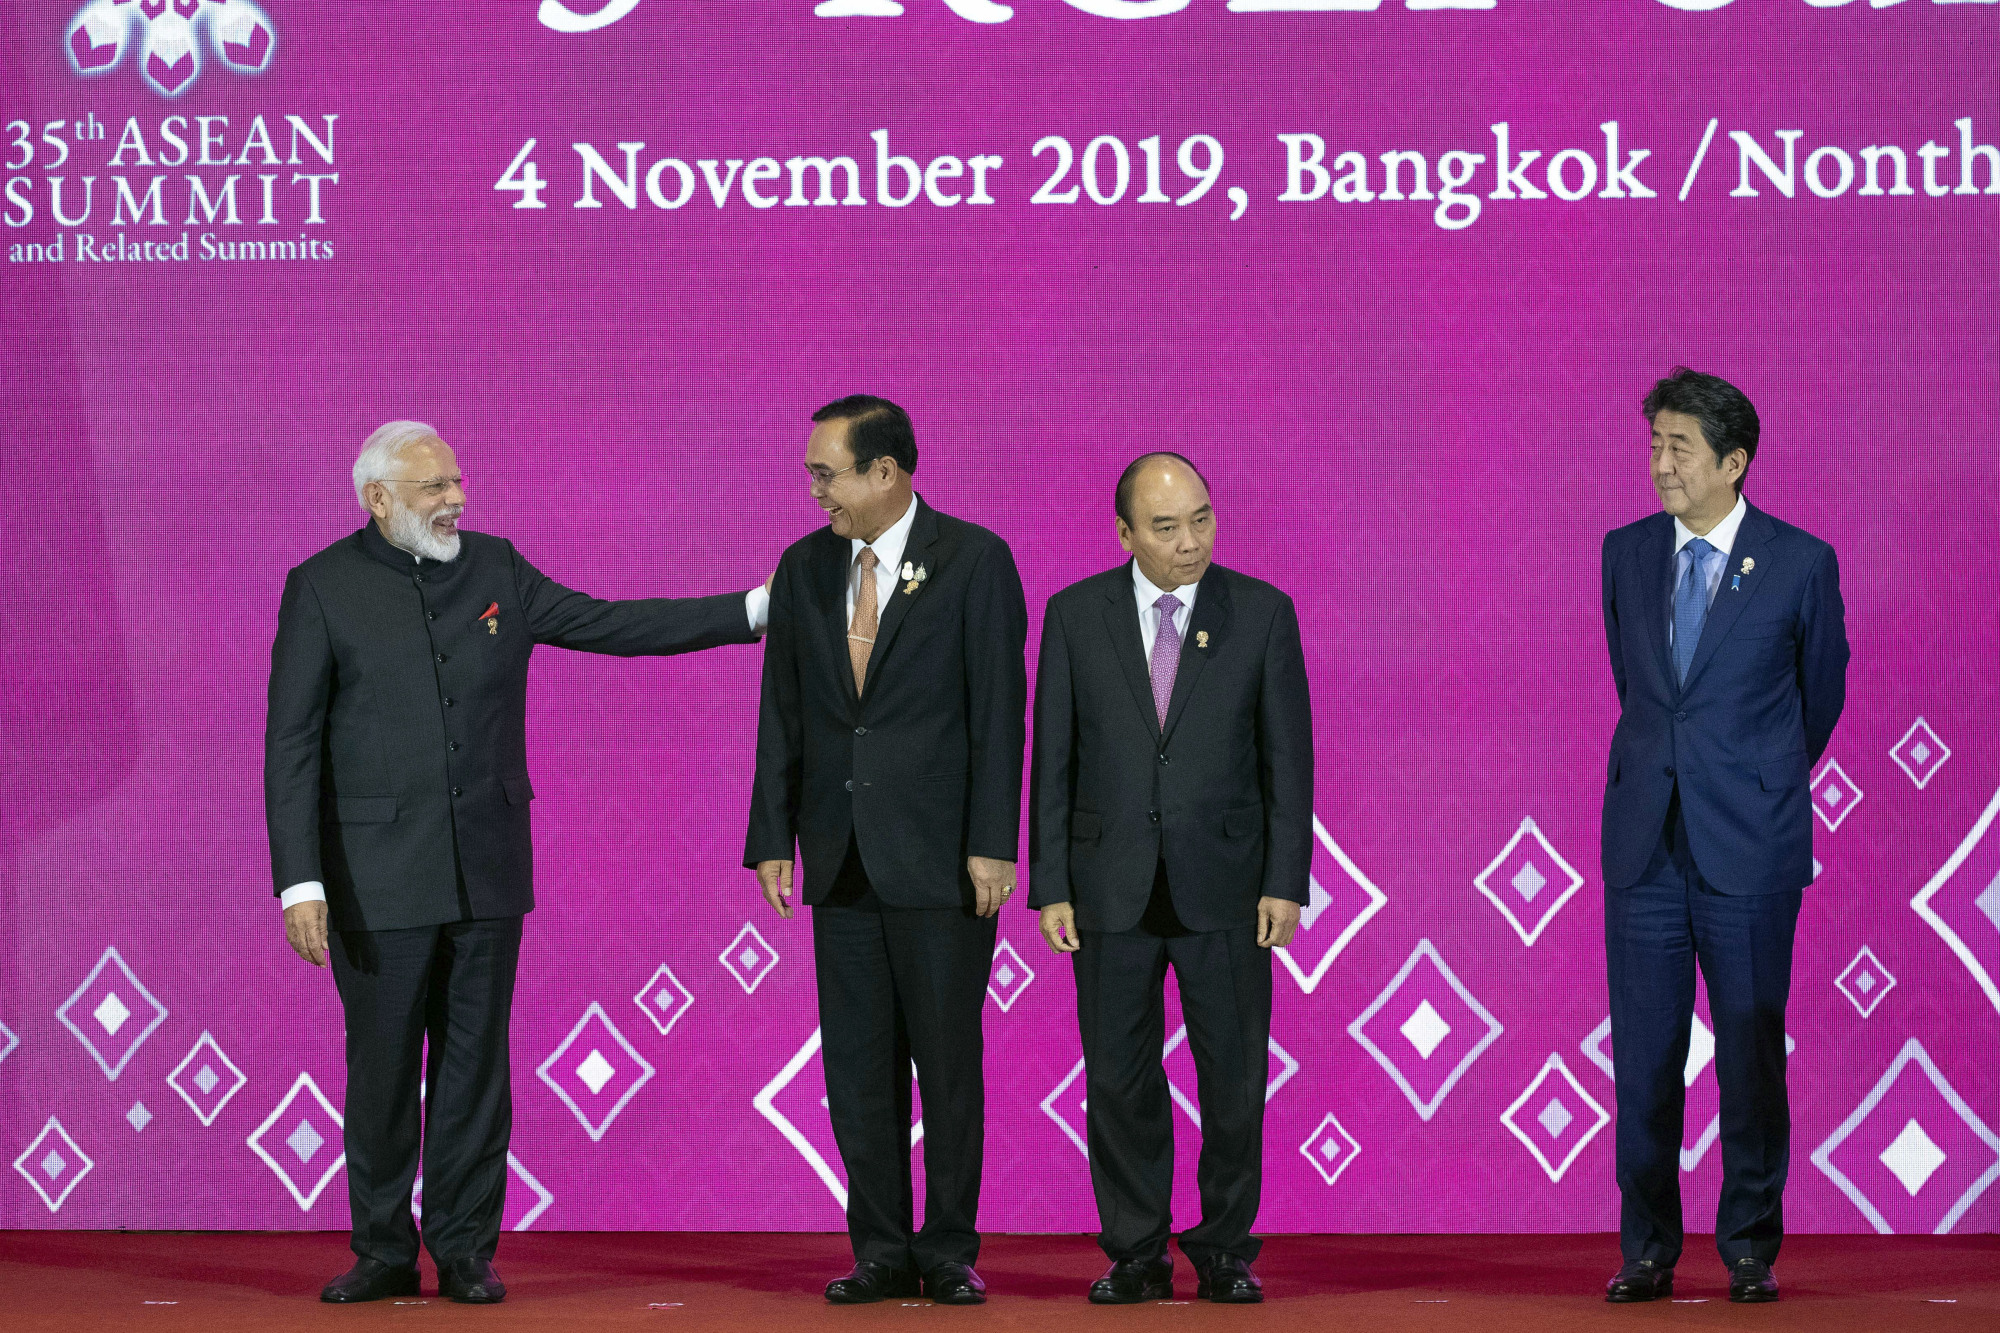 Prime Minister Shinzo Abe faces an uphill battle trying to persuade Indian Prime Minister Narendra Modi (left) to rejoin the Regional Comprehensive Economic Partnership negotiations. | AP